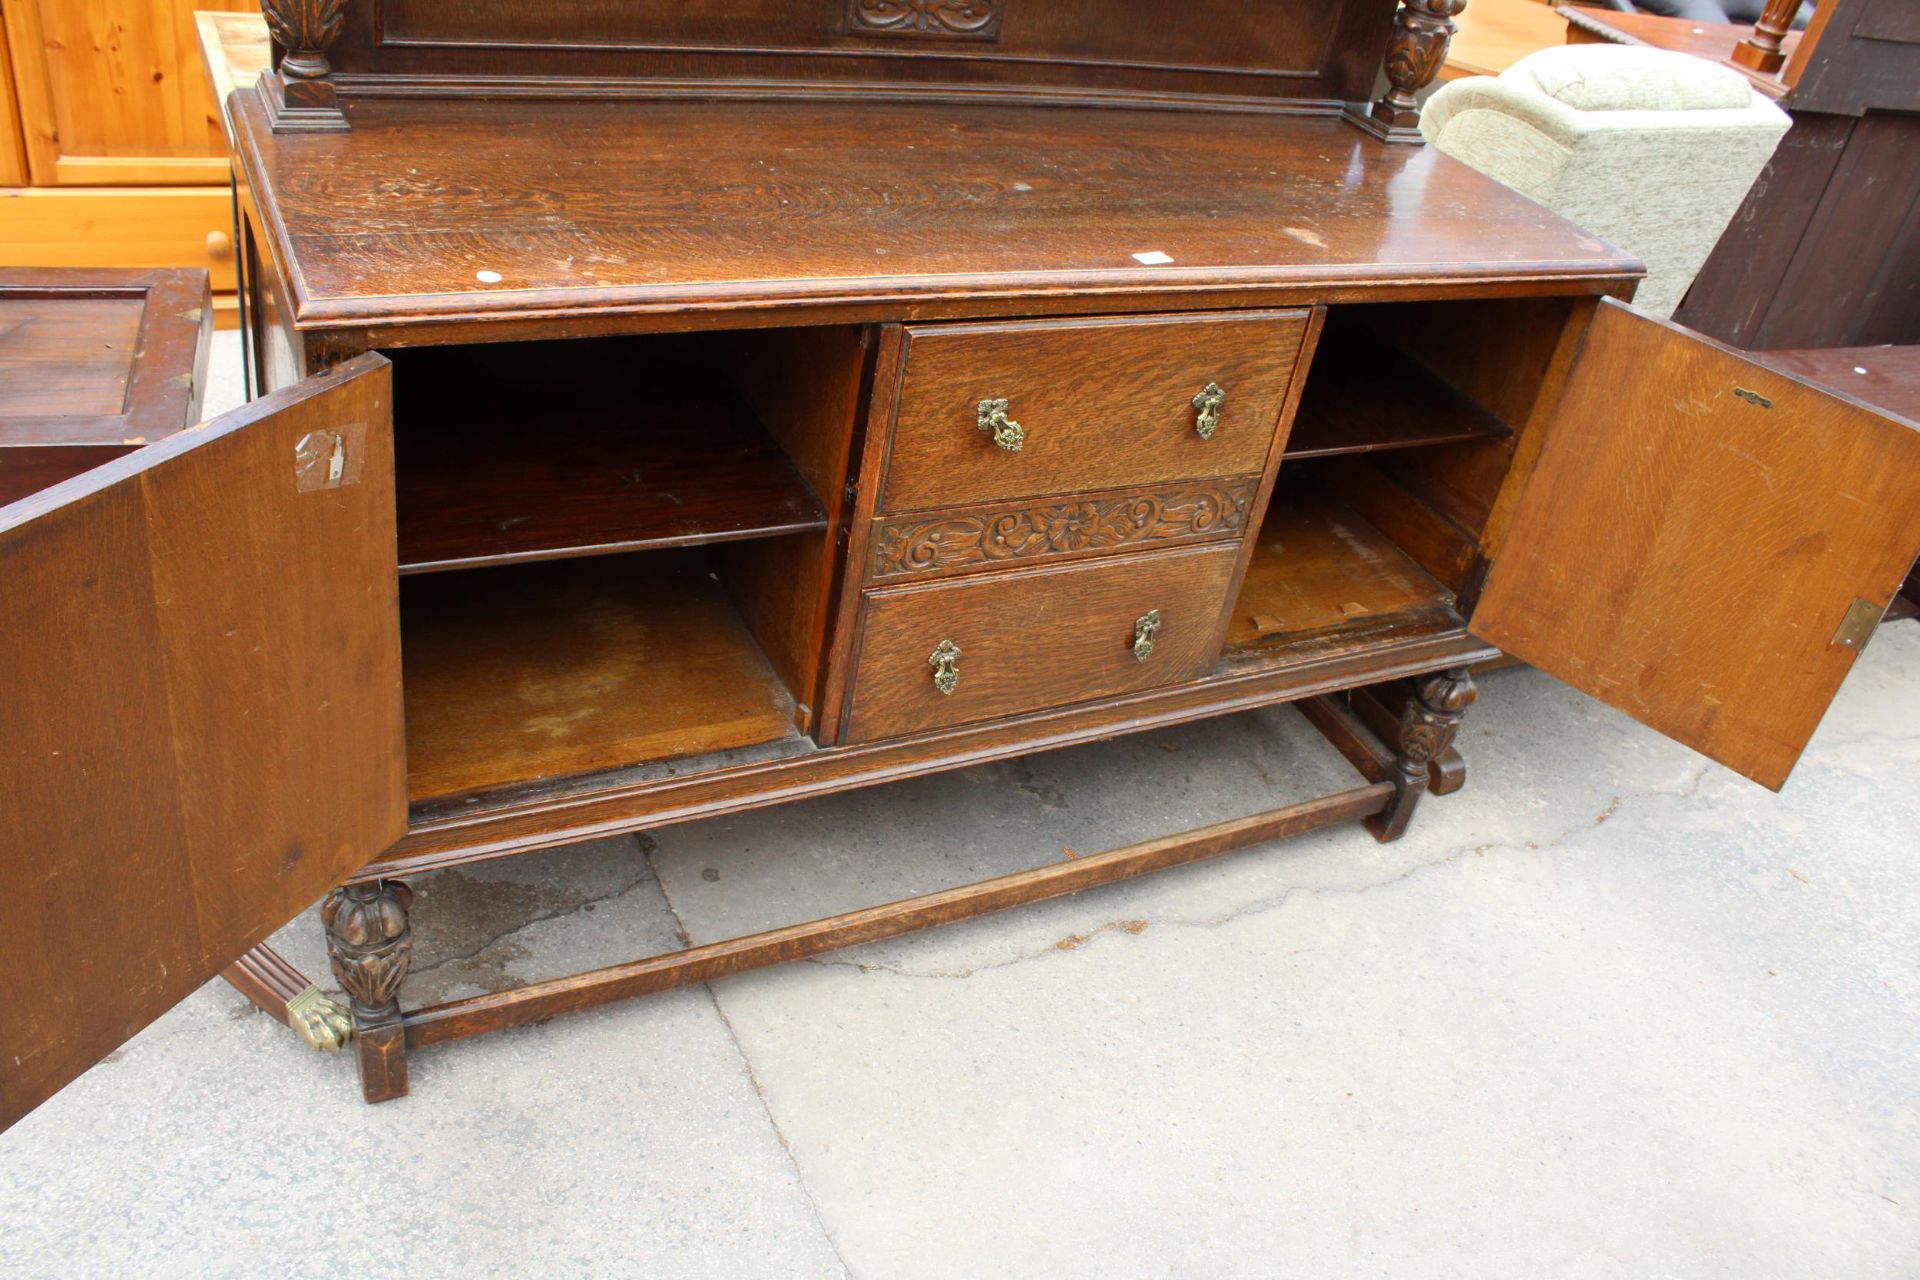 A MID 20TH CENTURY OAK SIDEBOARD WITH RAISED BACK, PINEAPPLE COLUMNS AND FRONT LEGS, LABELLED A. - Image 7 of 8